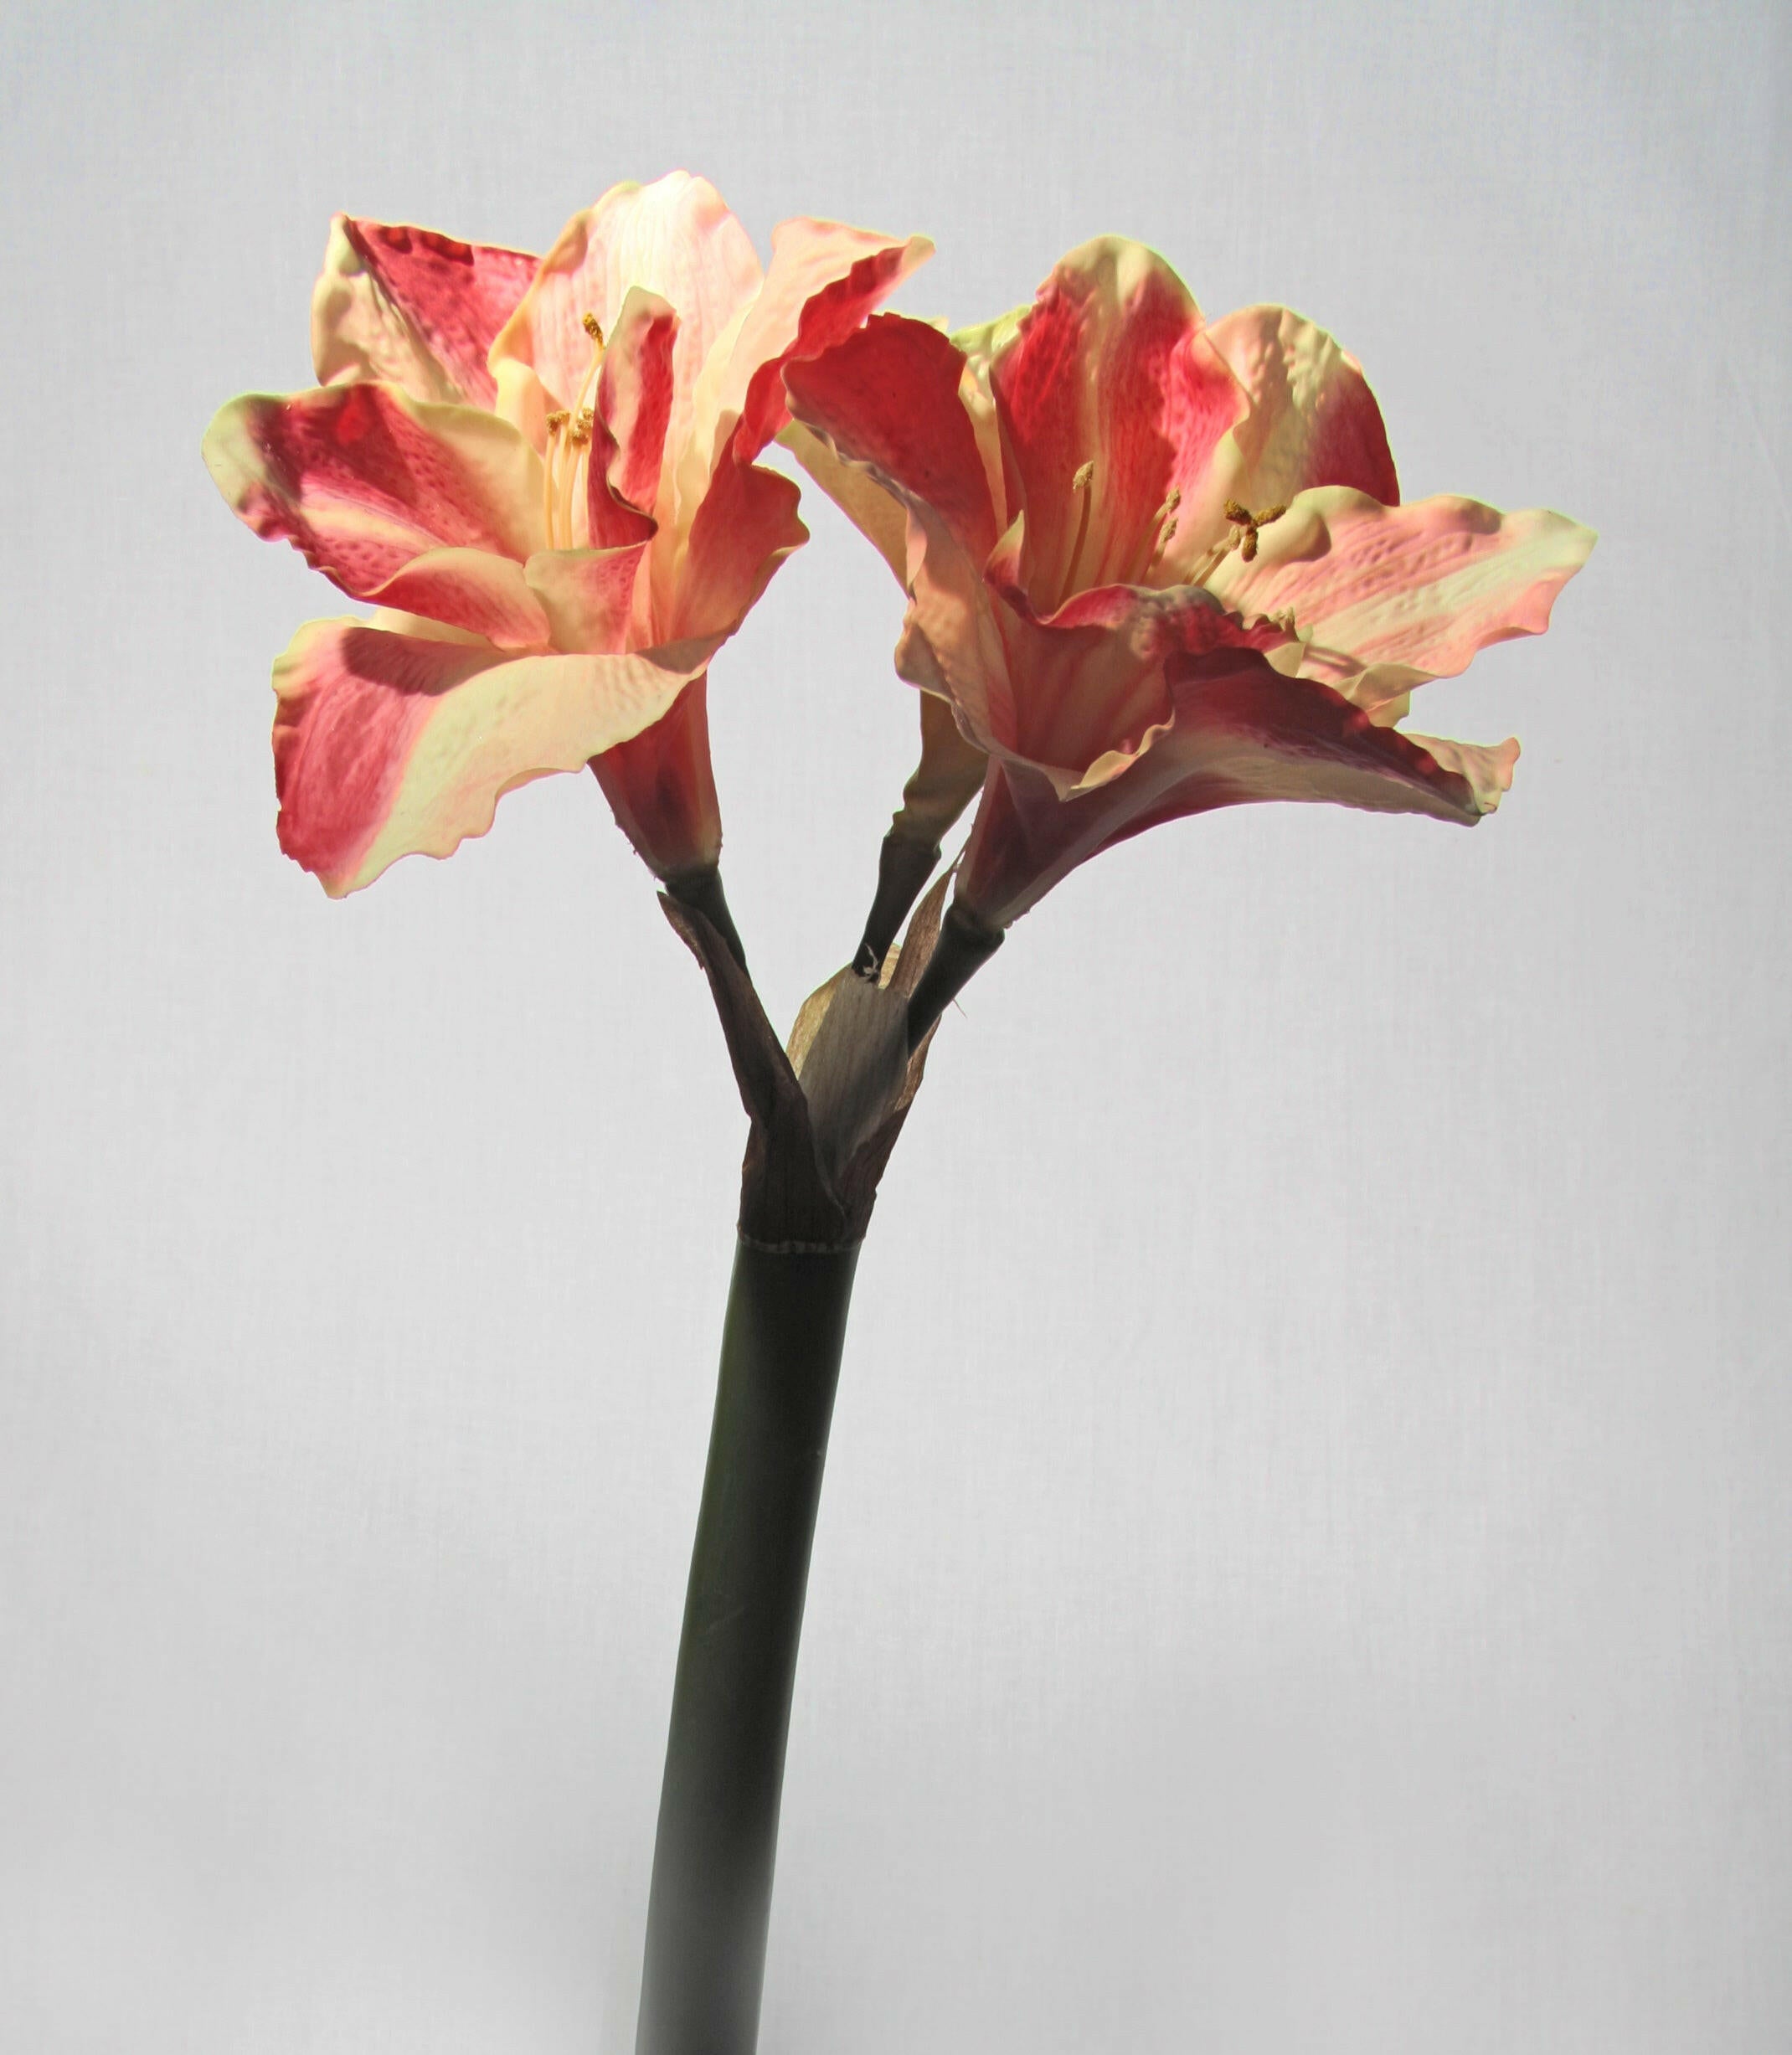 Artificial Silk Real Touch Amaryllis Single Stem